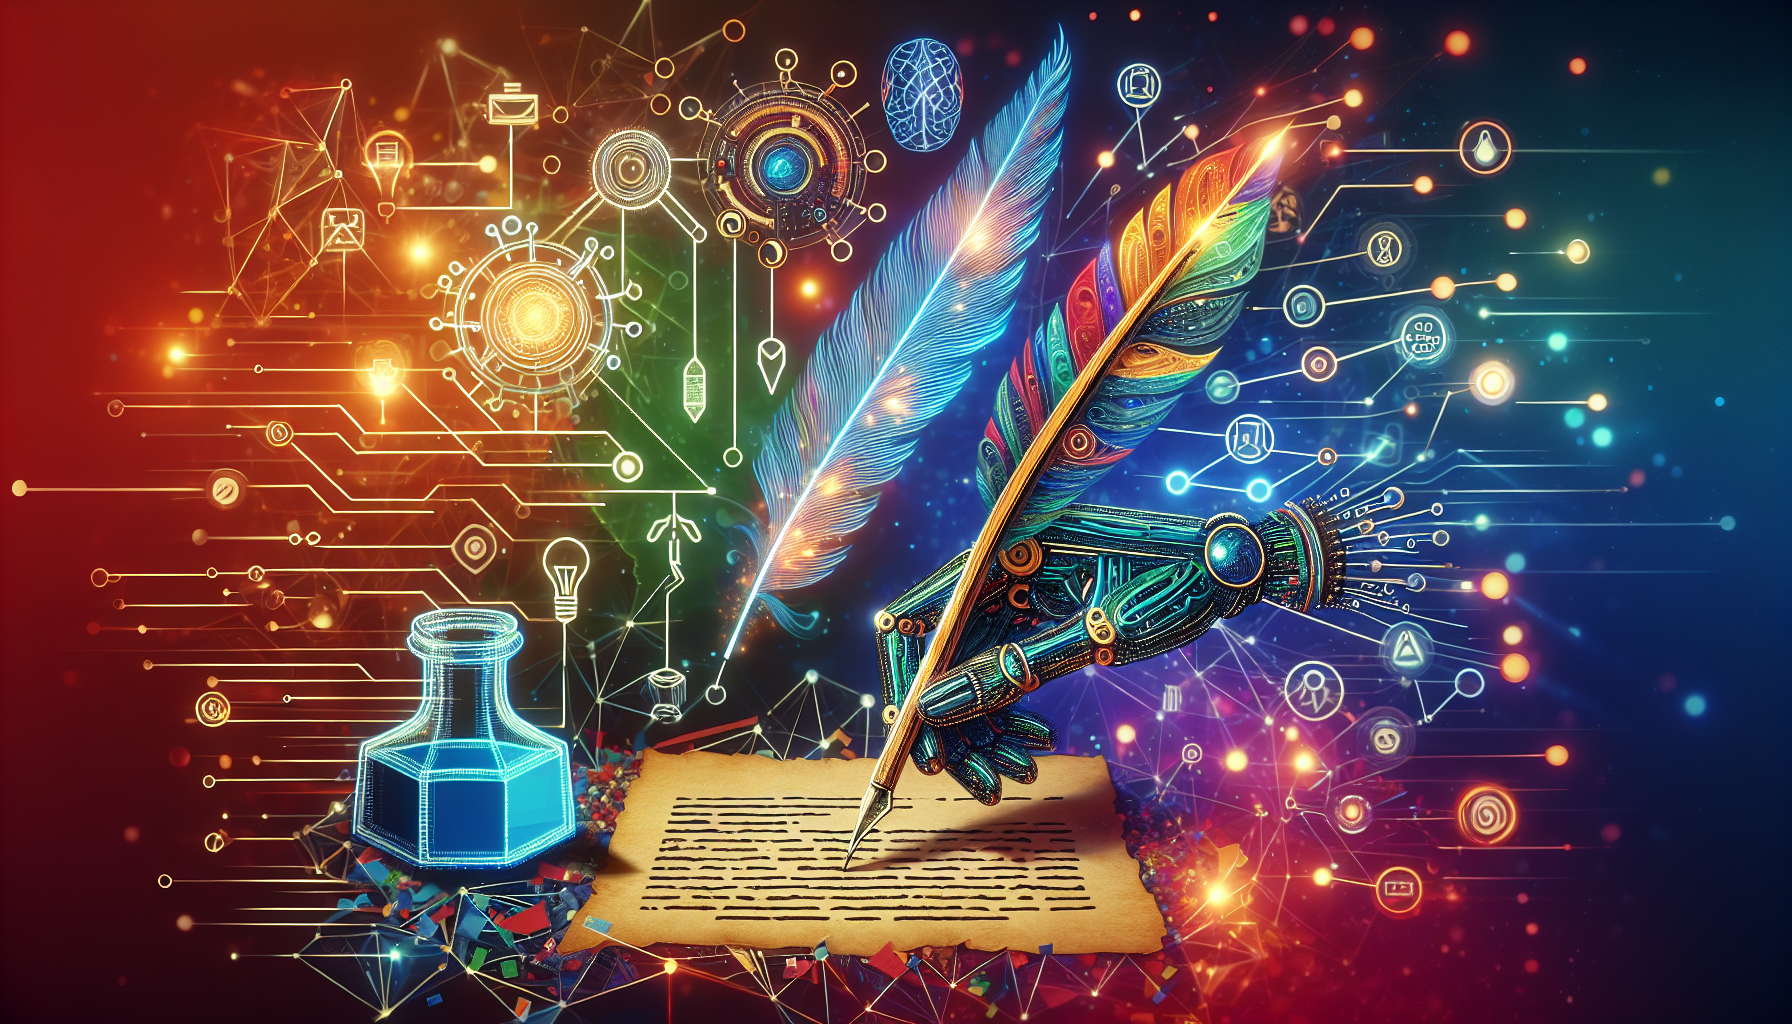 An innovative and colorful modern illustration showcasing the influence of AI on screenplay formatting. The image could feature iconic symbols such as a quill and an inkwell, signifying traditional scriptwriting, intertwined with futuristic elements like a neural network or robotic hand. The background can be brimming with vibrant colors to emphasize the contemporary aspects of the scene. No words or text should be included in this imagery.